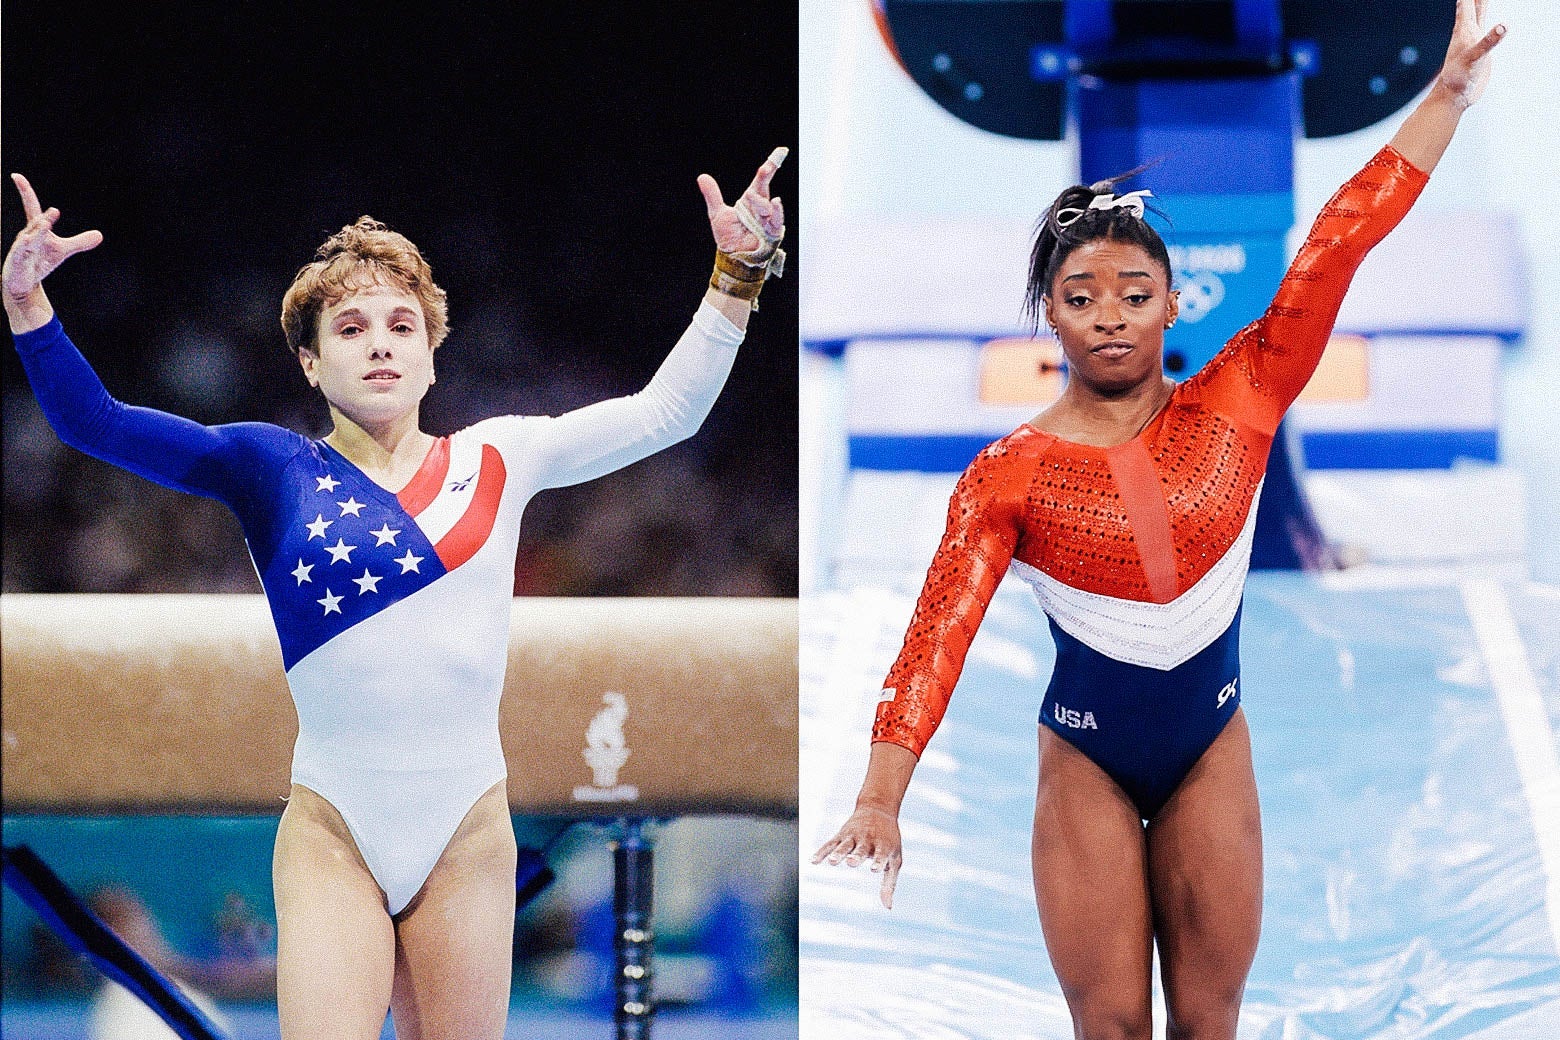 Left: Kerri Strug standing legs together with both arms raised after vaulting. Right: Simone Biles also with legs together, her left arm raised and right arm down and out beside her, also after vaulting. 